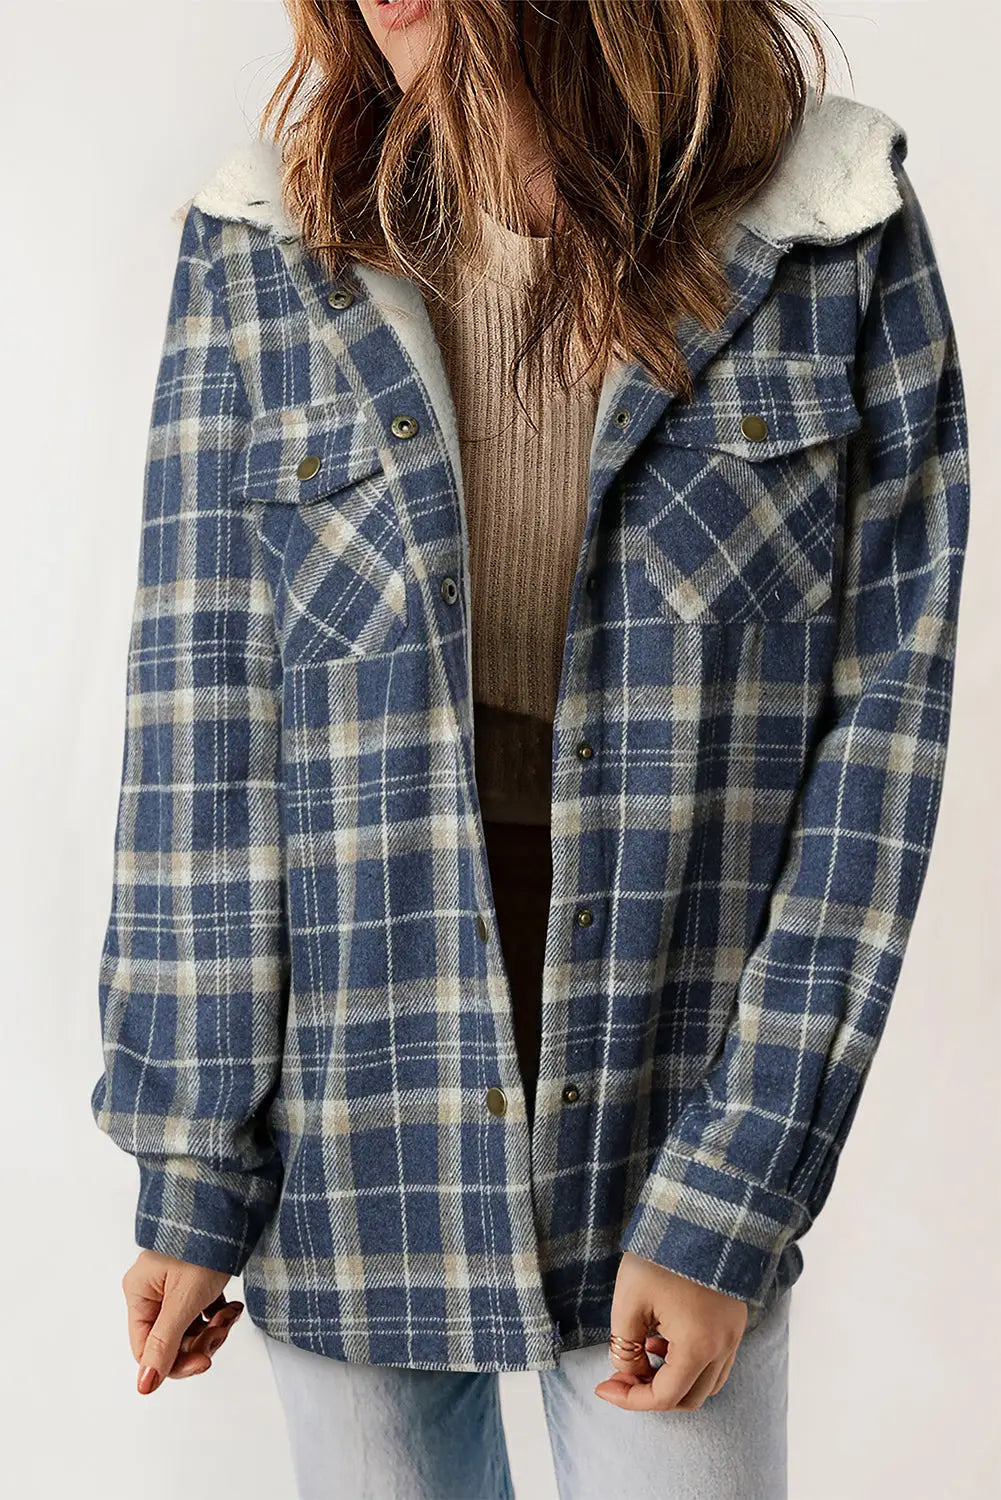 Blue plaid pattern sherpa lined hooded shacket - xl / 100% polyester - shackets